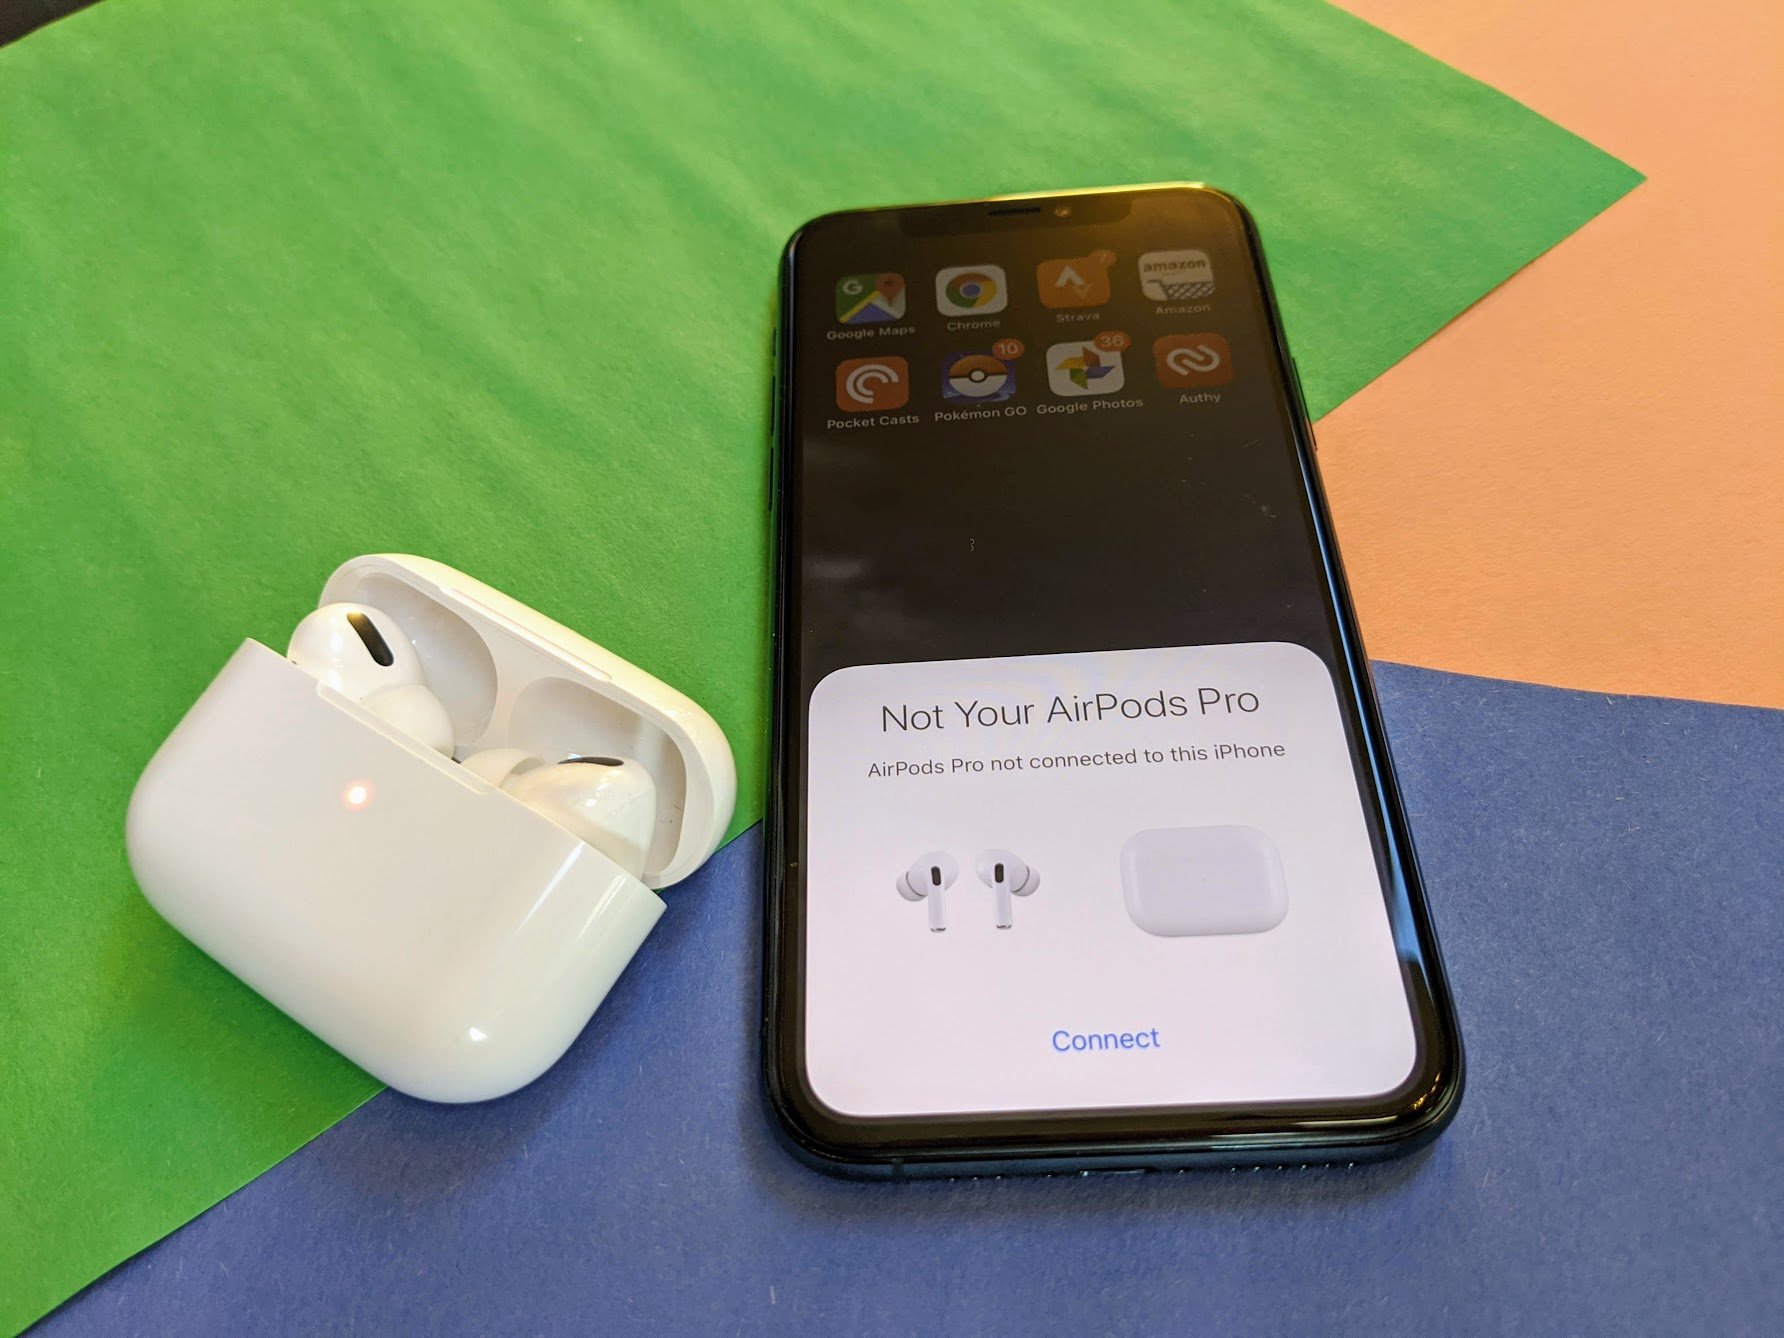 Just like the iPhone, Apple has now created the 'AirPods ...